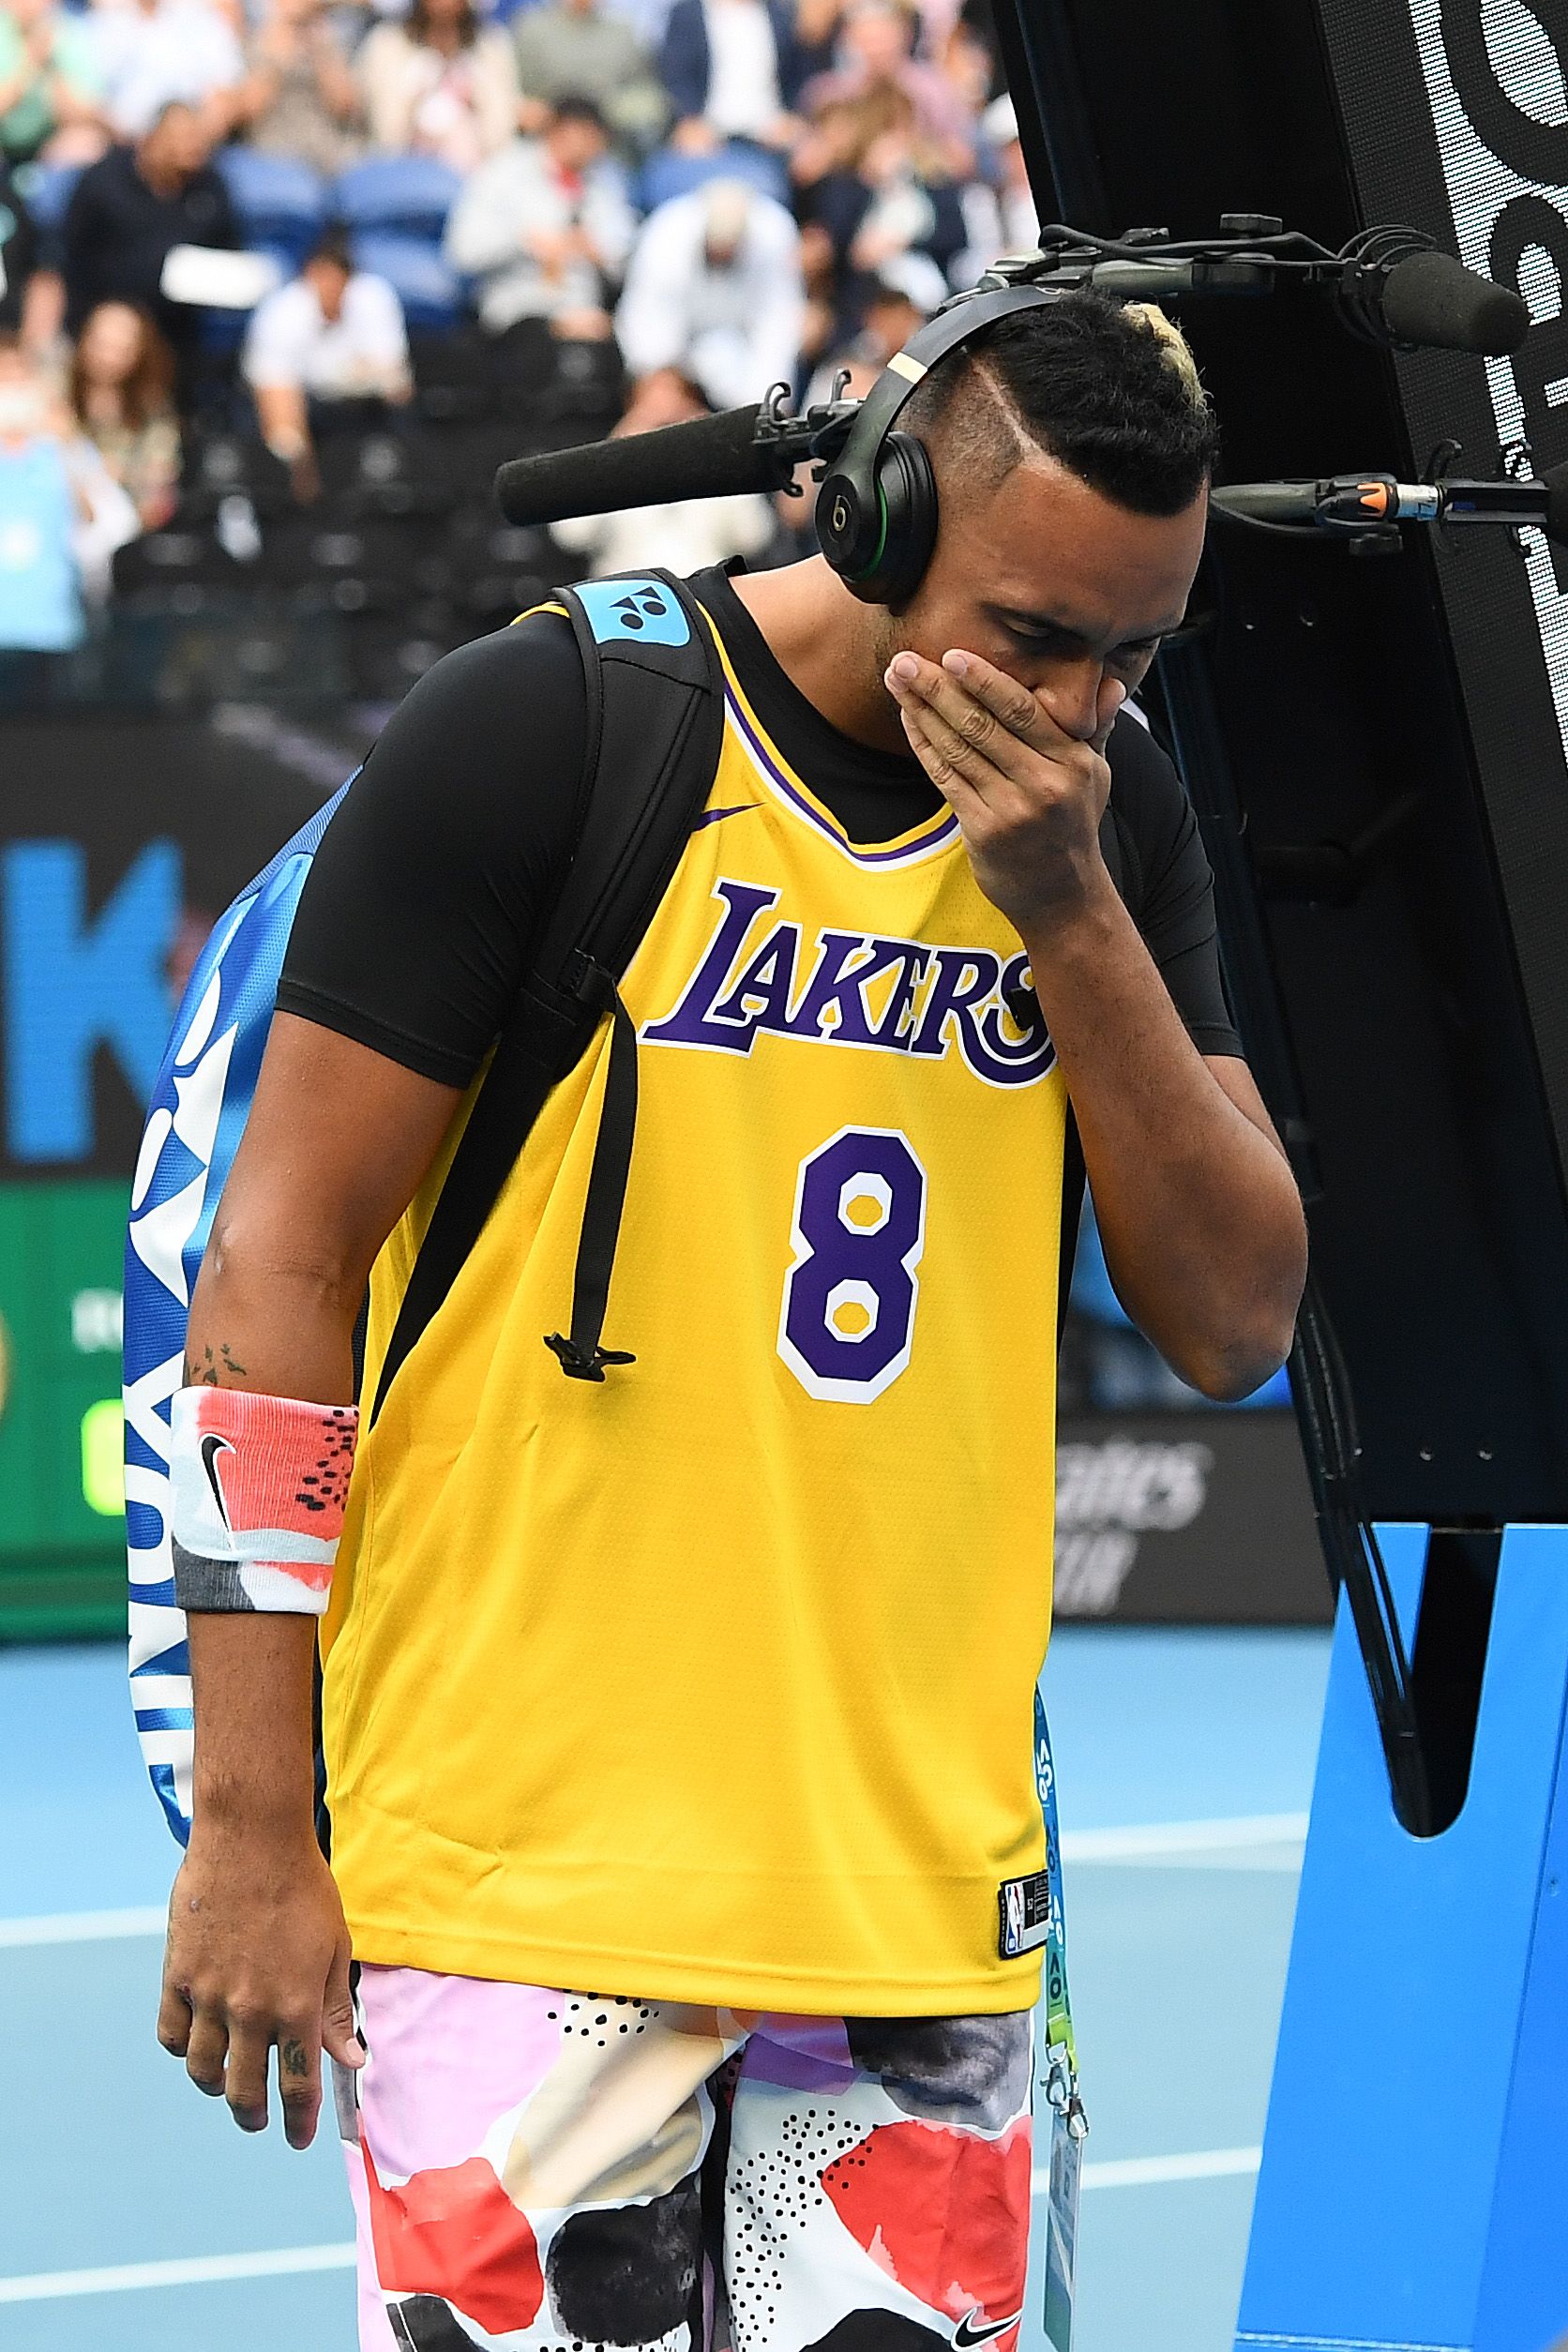 Players pay respects to Kobe Bryant at Australian Open